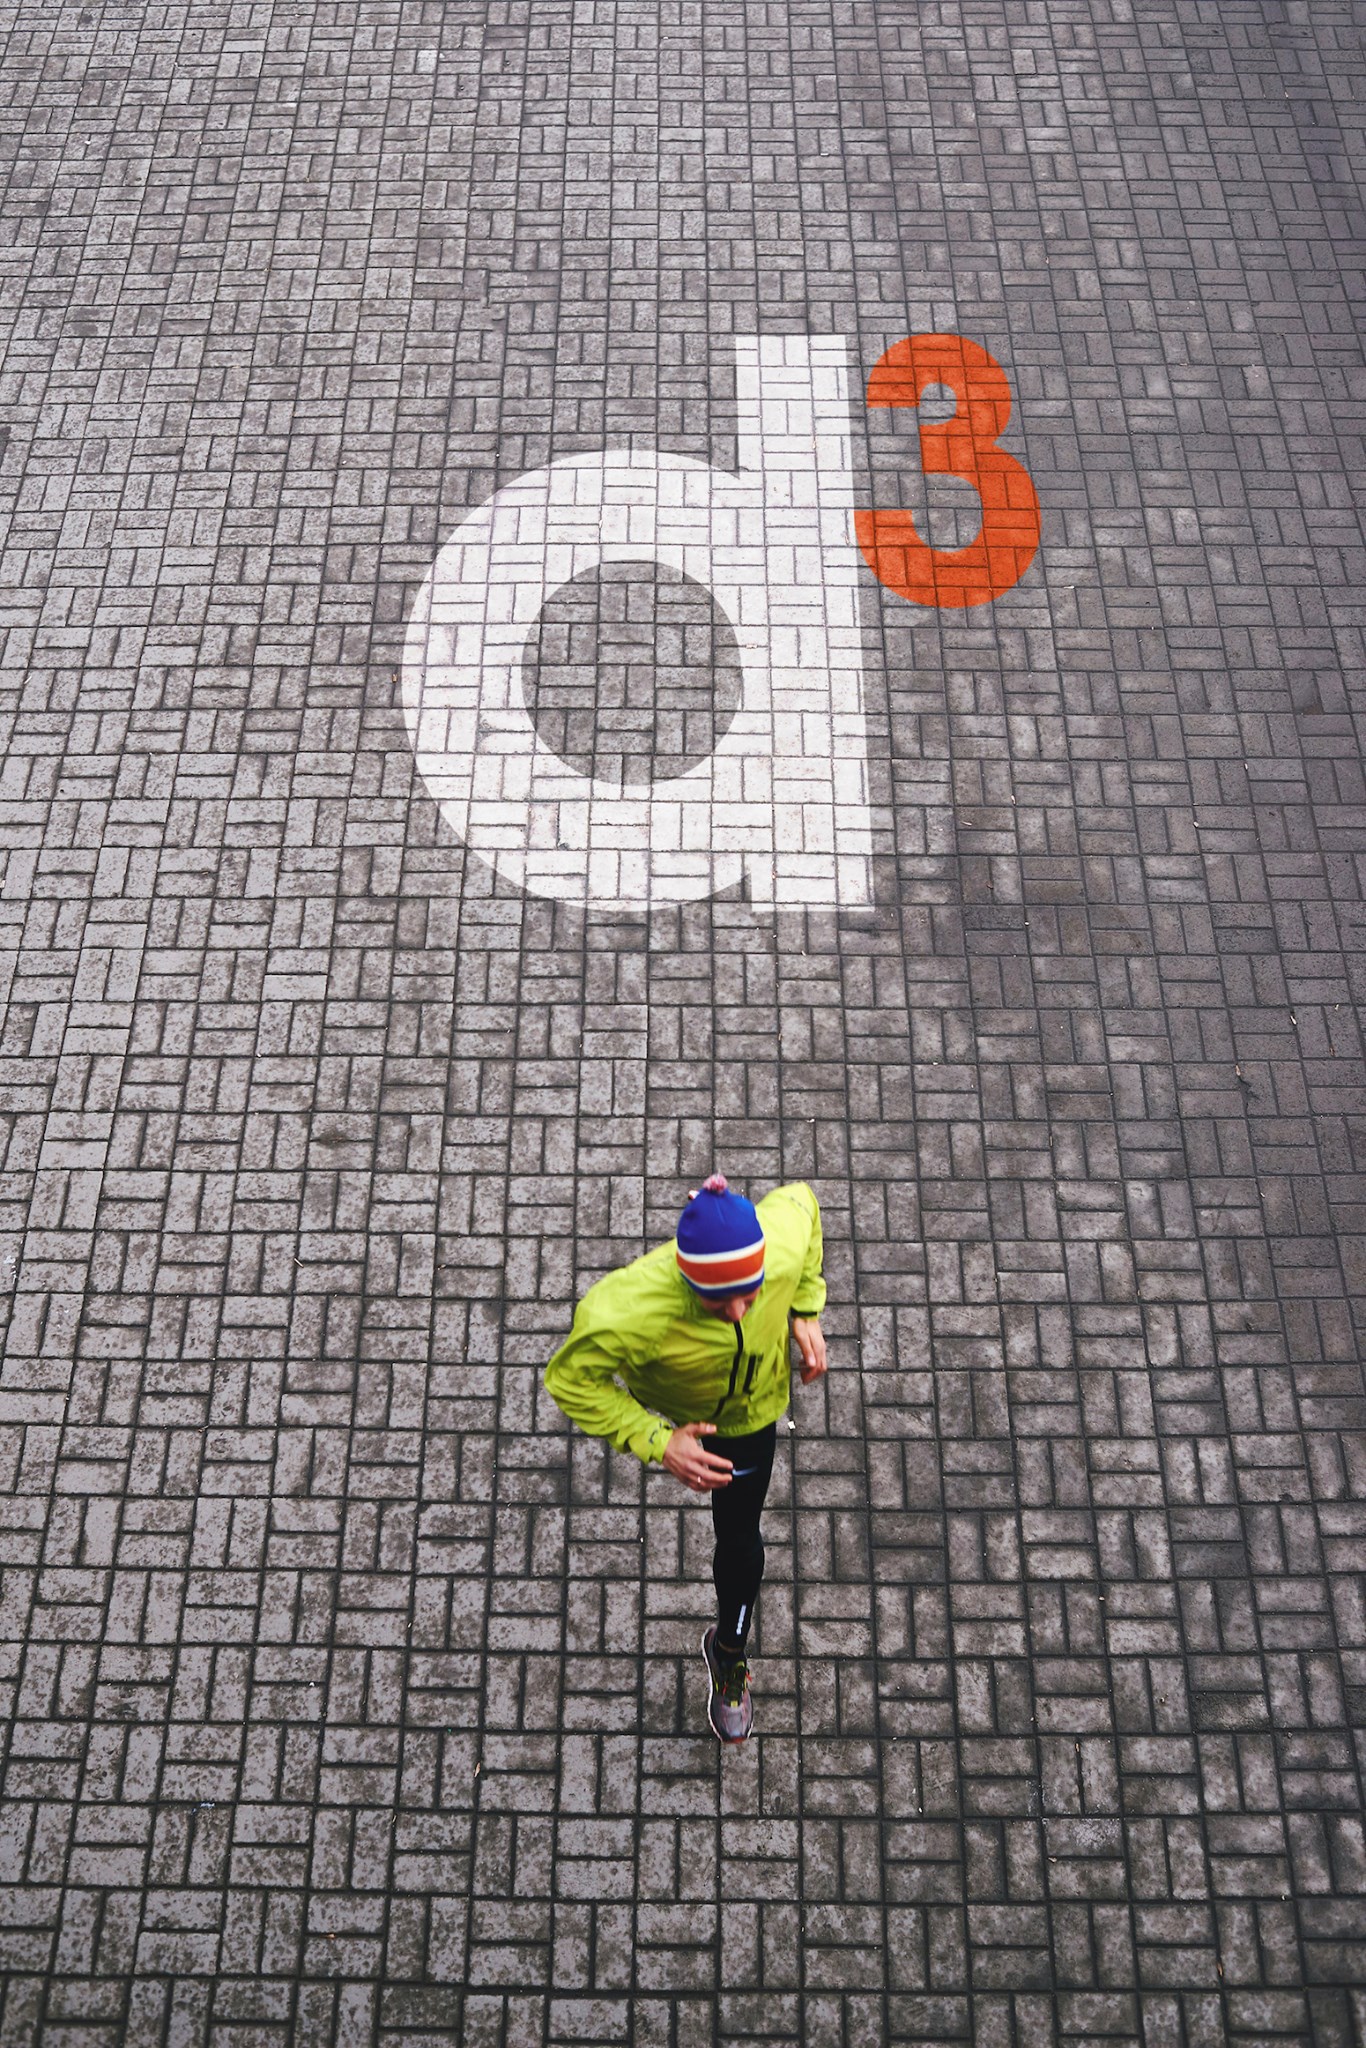 Man running over brick road with d3 logo